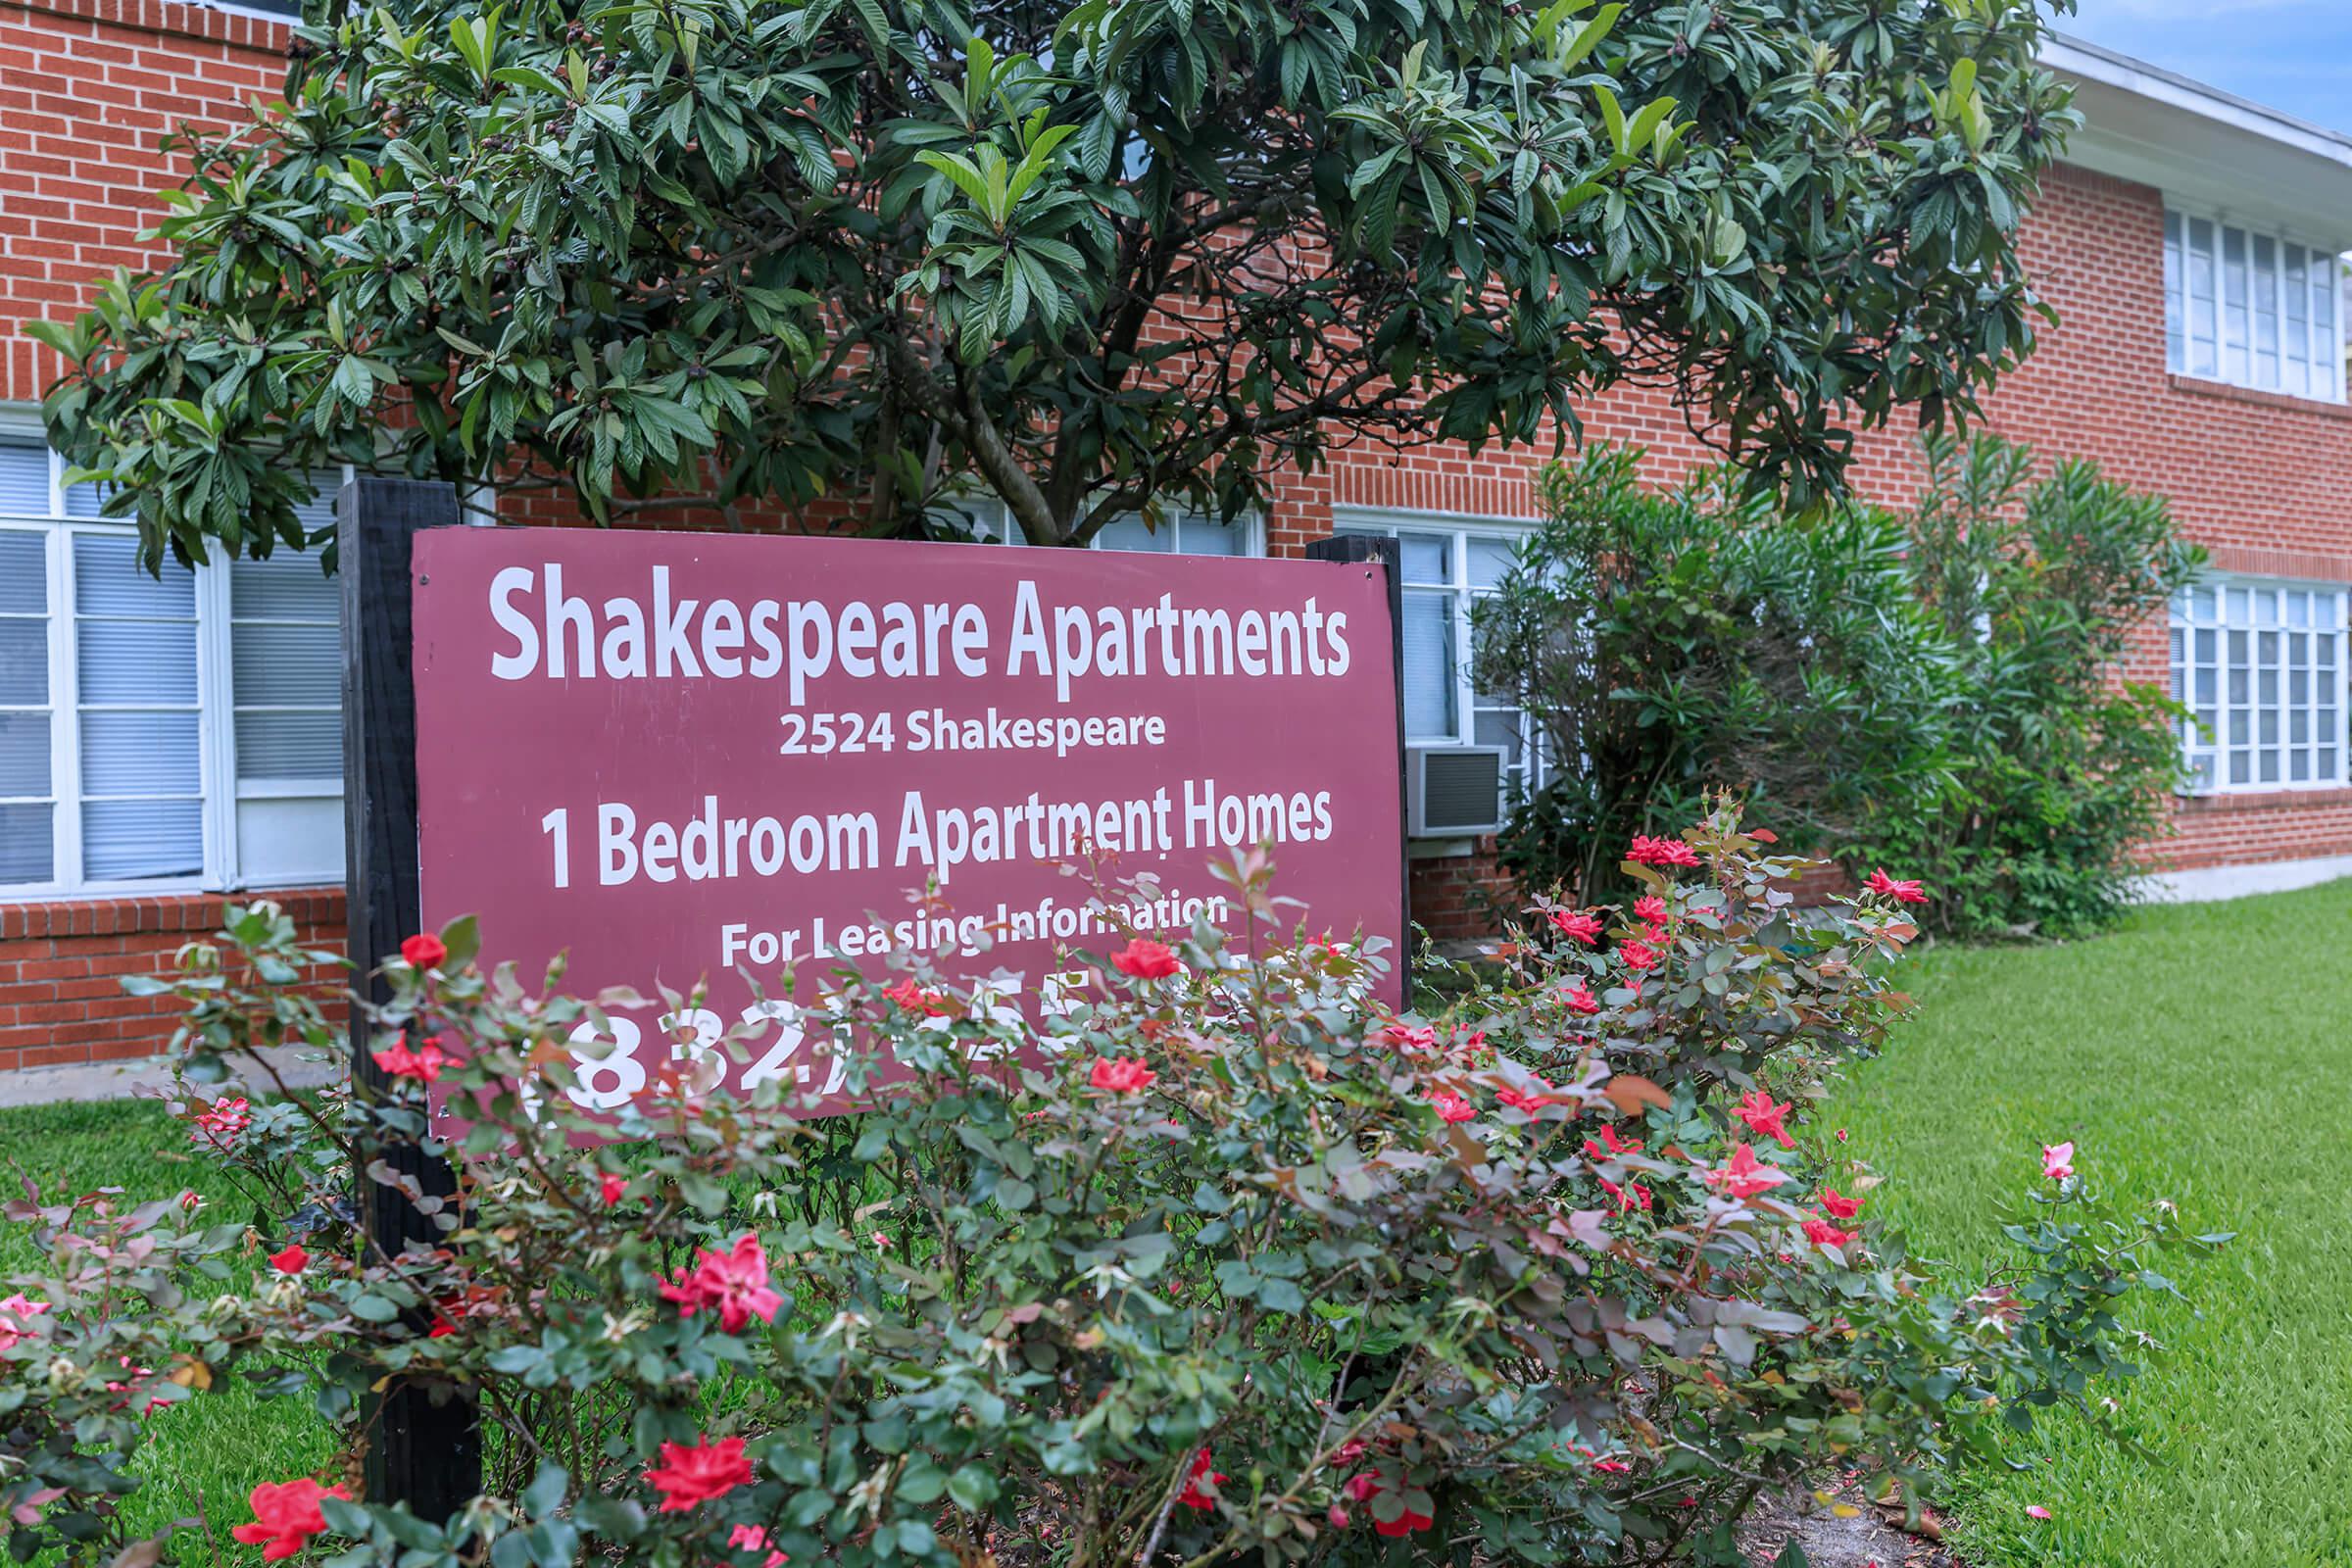 Picture of Shakespeare Apartments